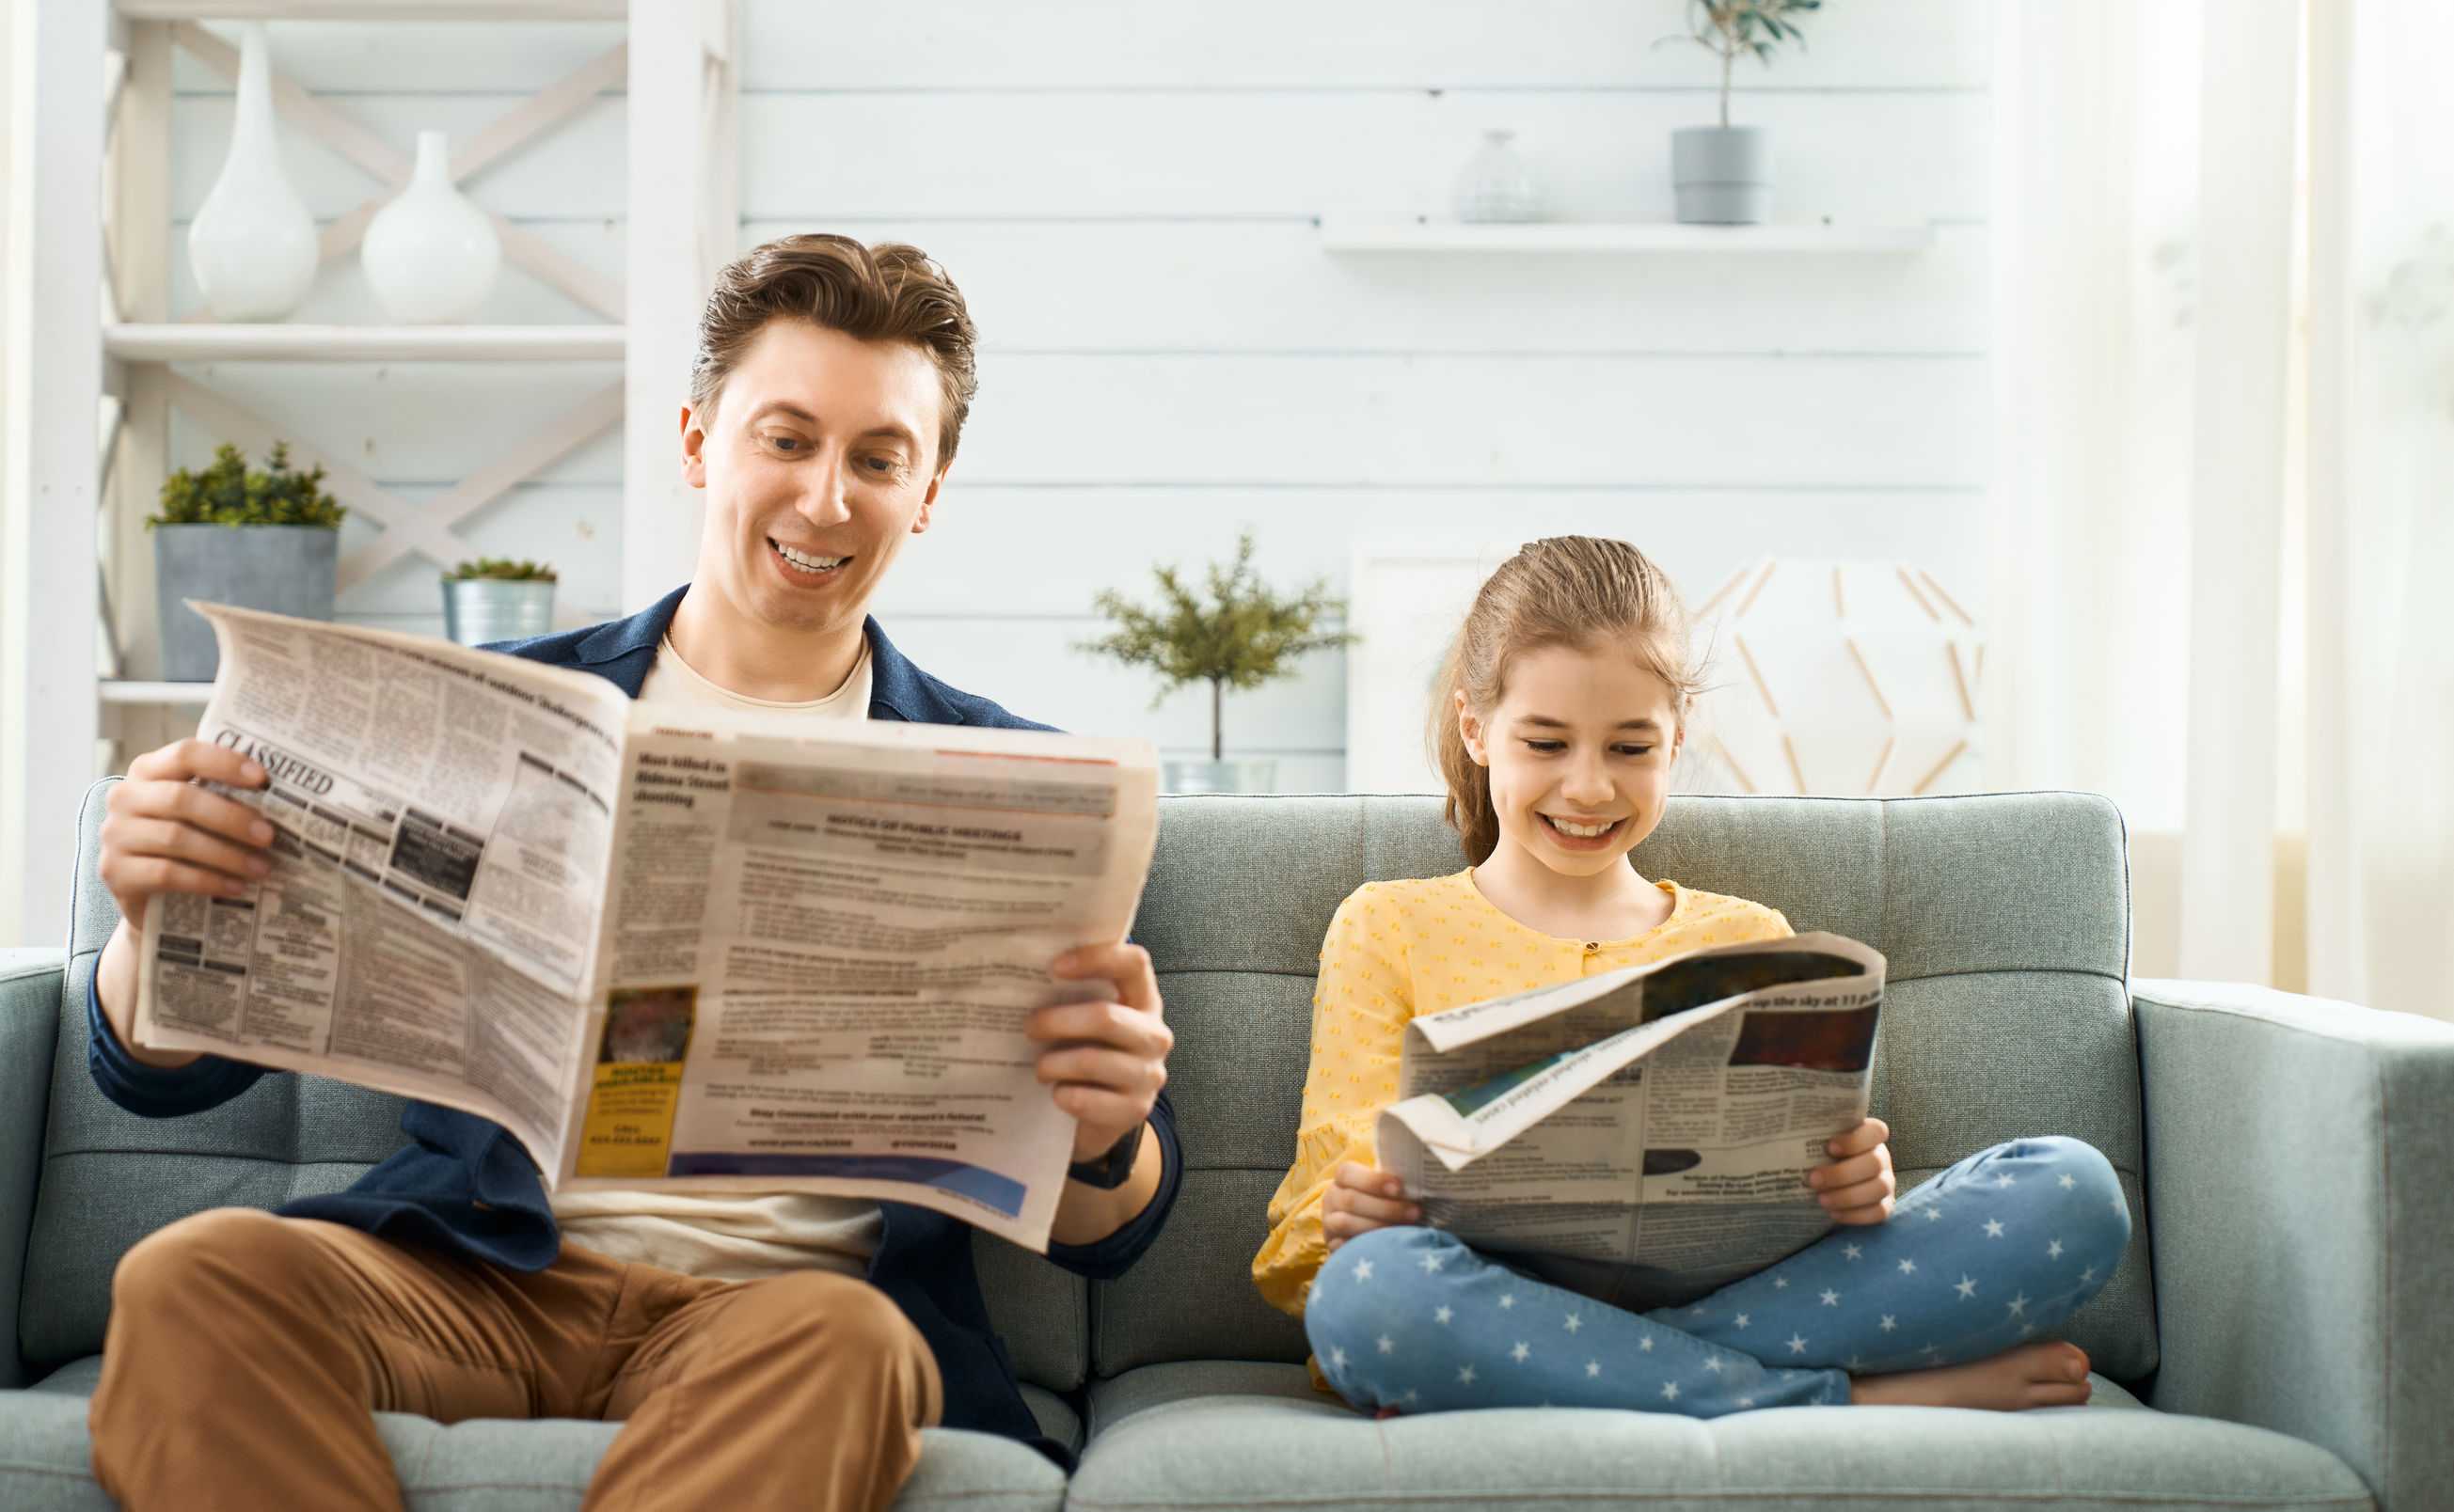 Dad and daughter reading newspaper